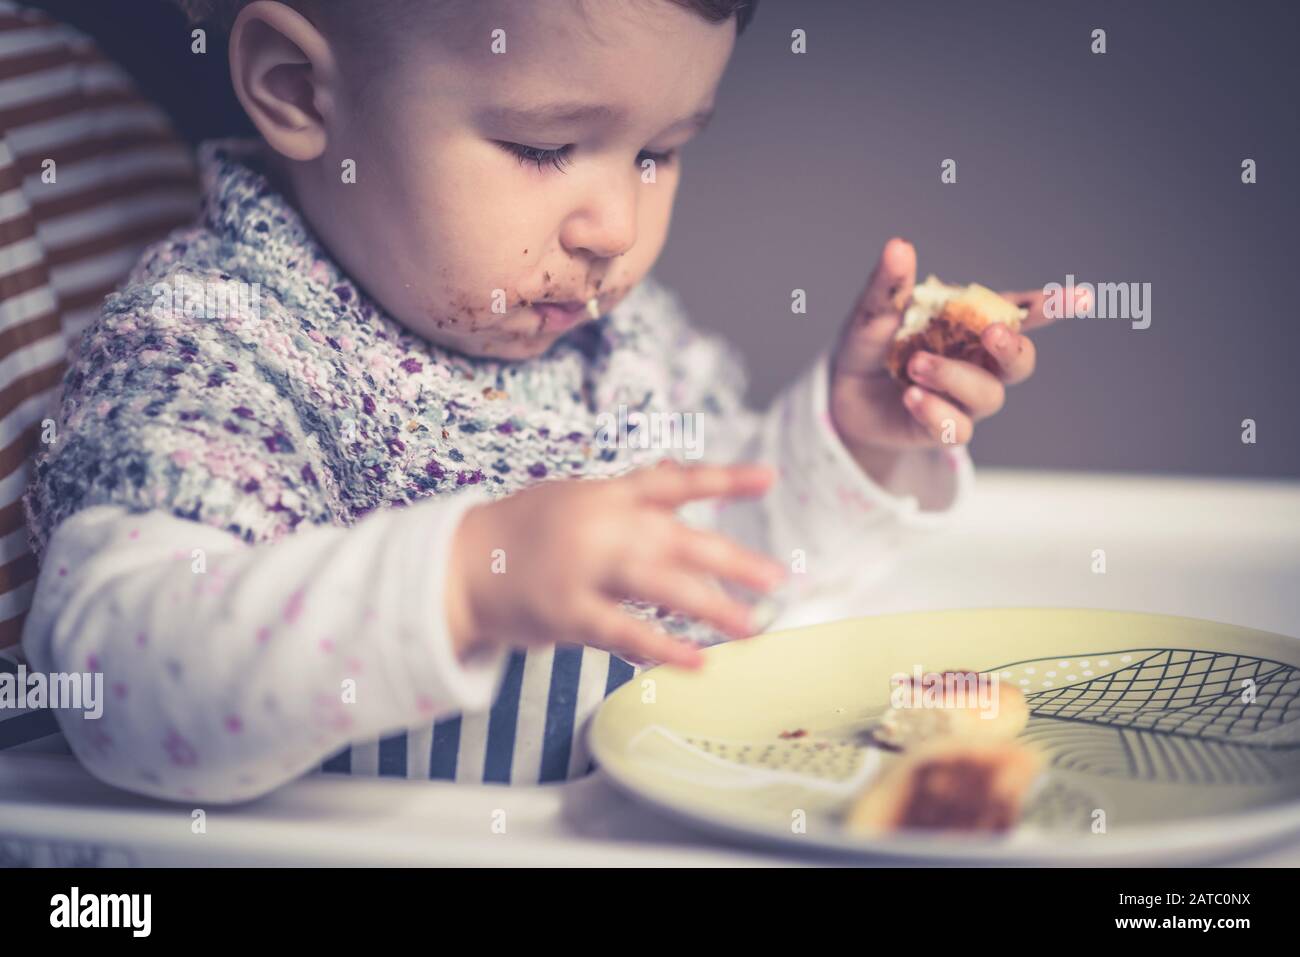 The nice baby with messy face eating cheese cakes Stock Photo